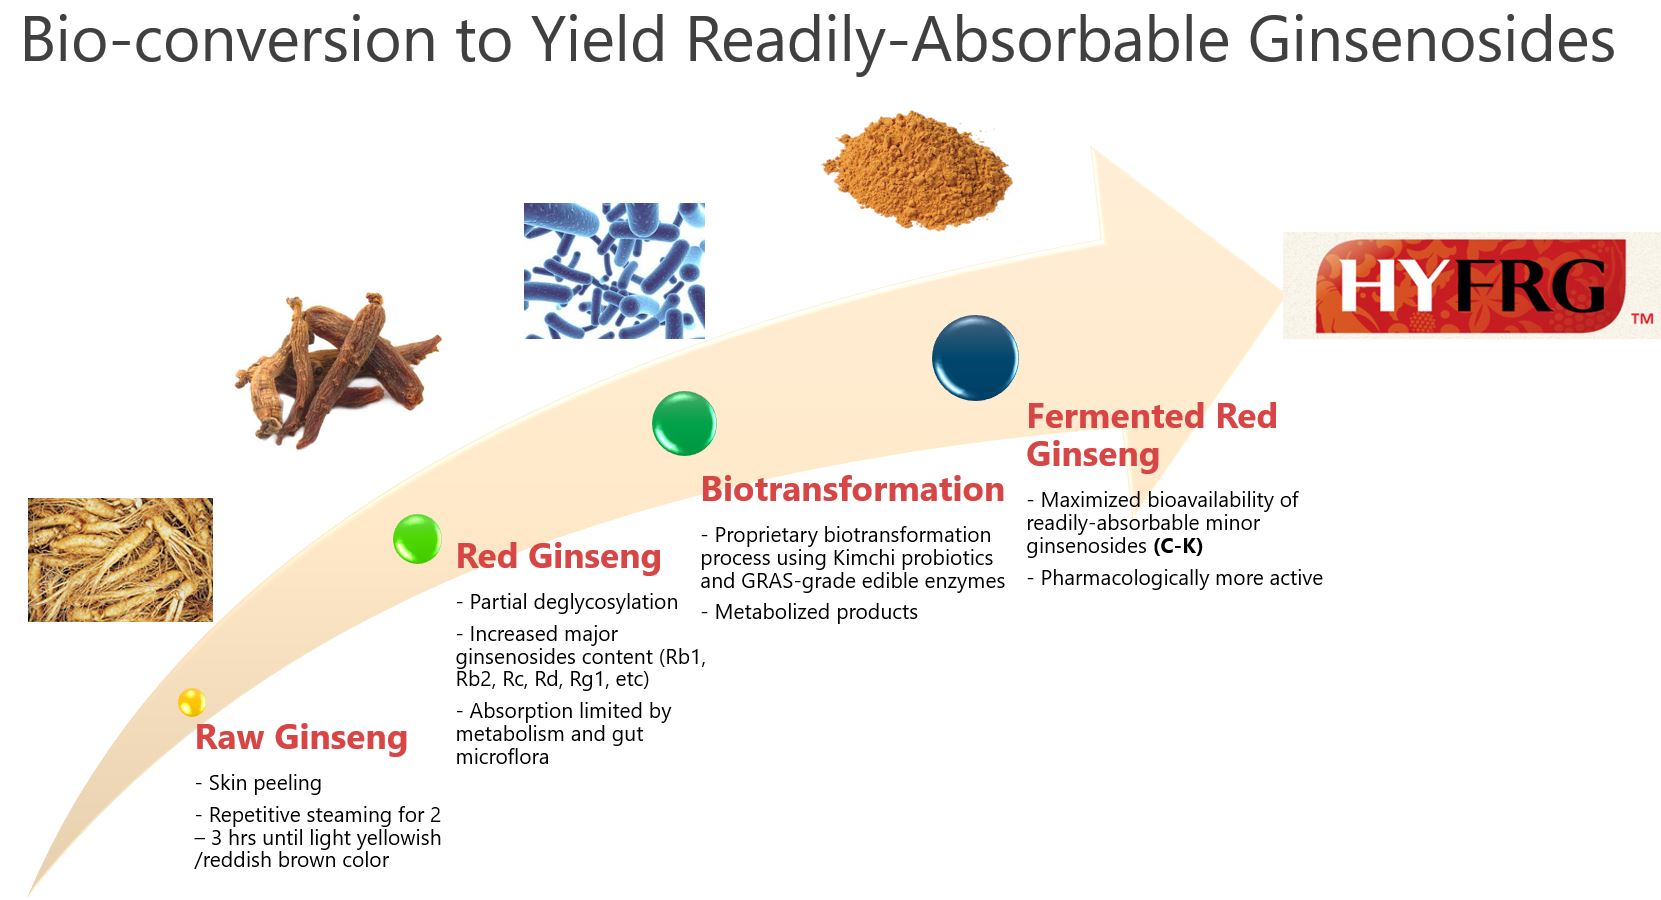 Bio-conversion to Yield Readily-Absorbable Ginsenosides